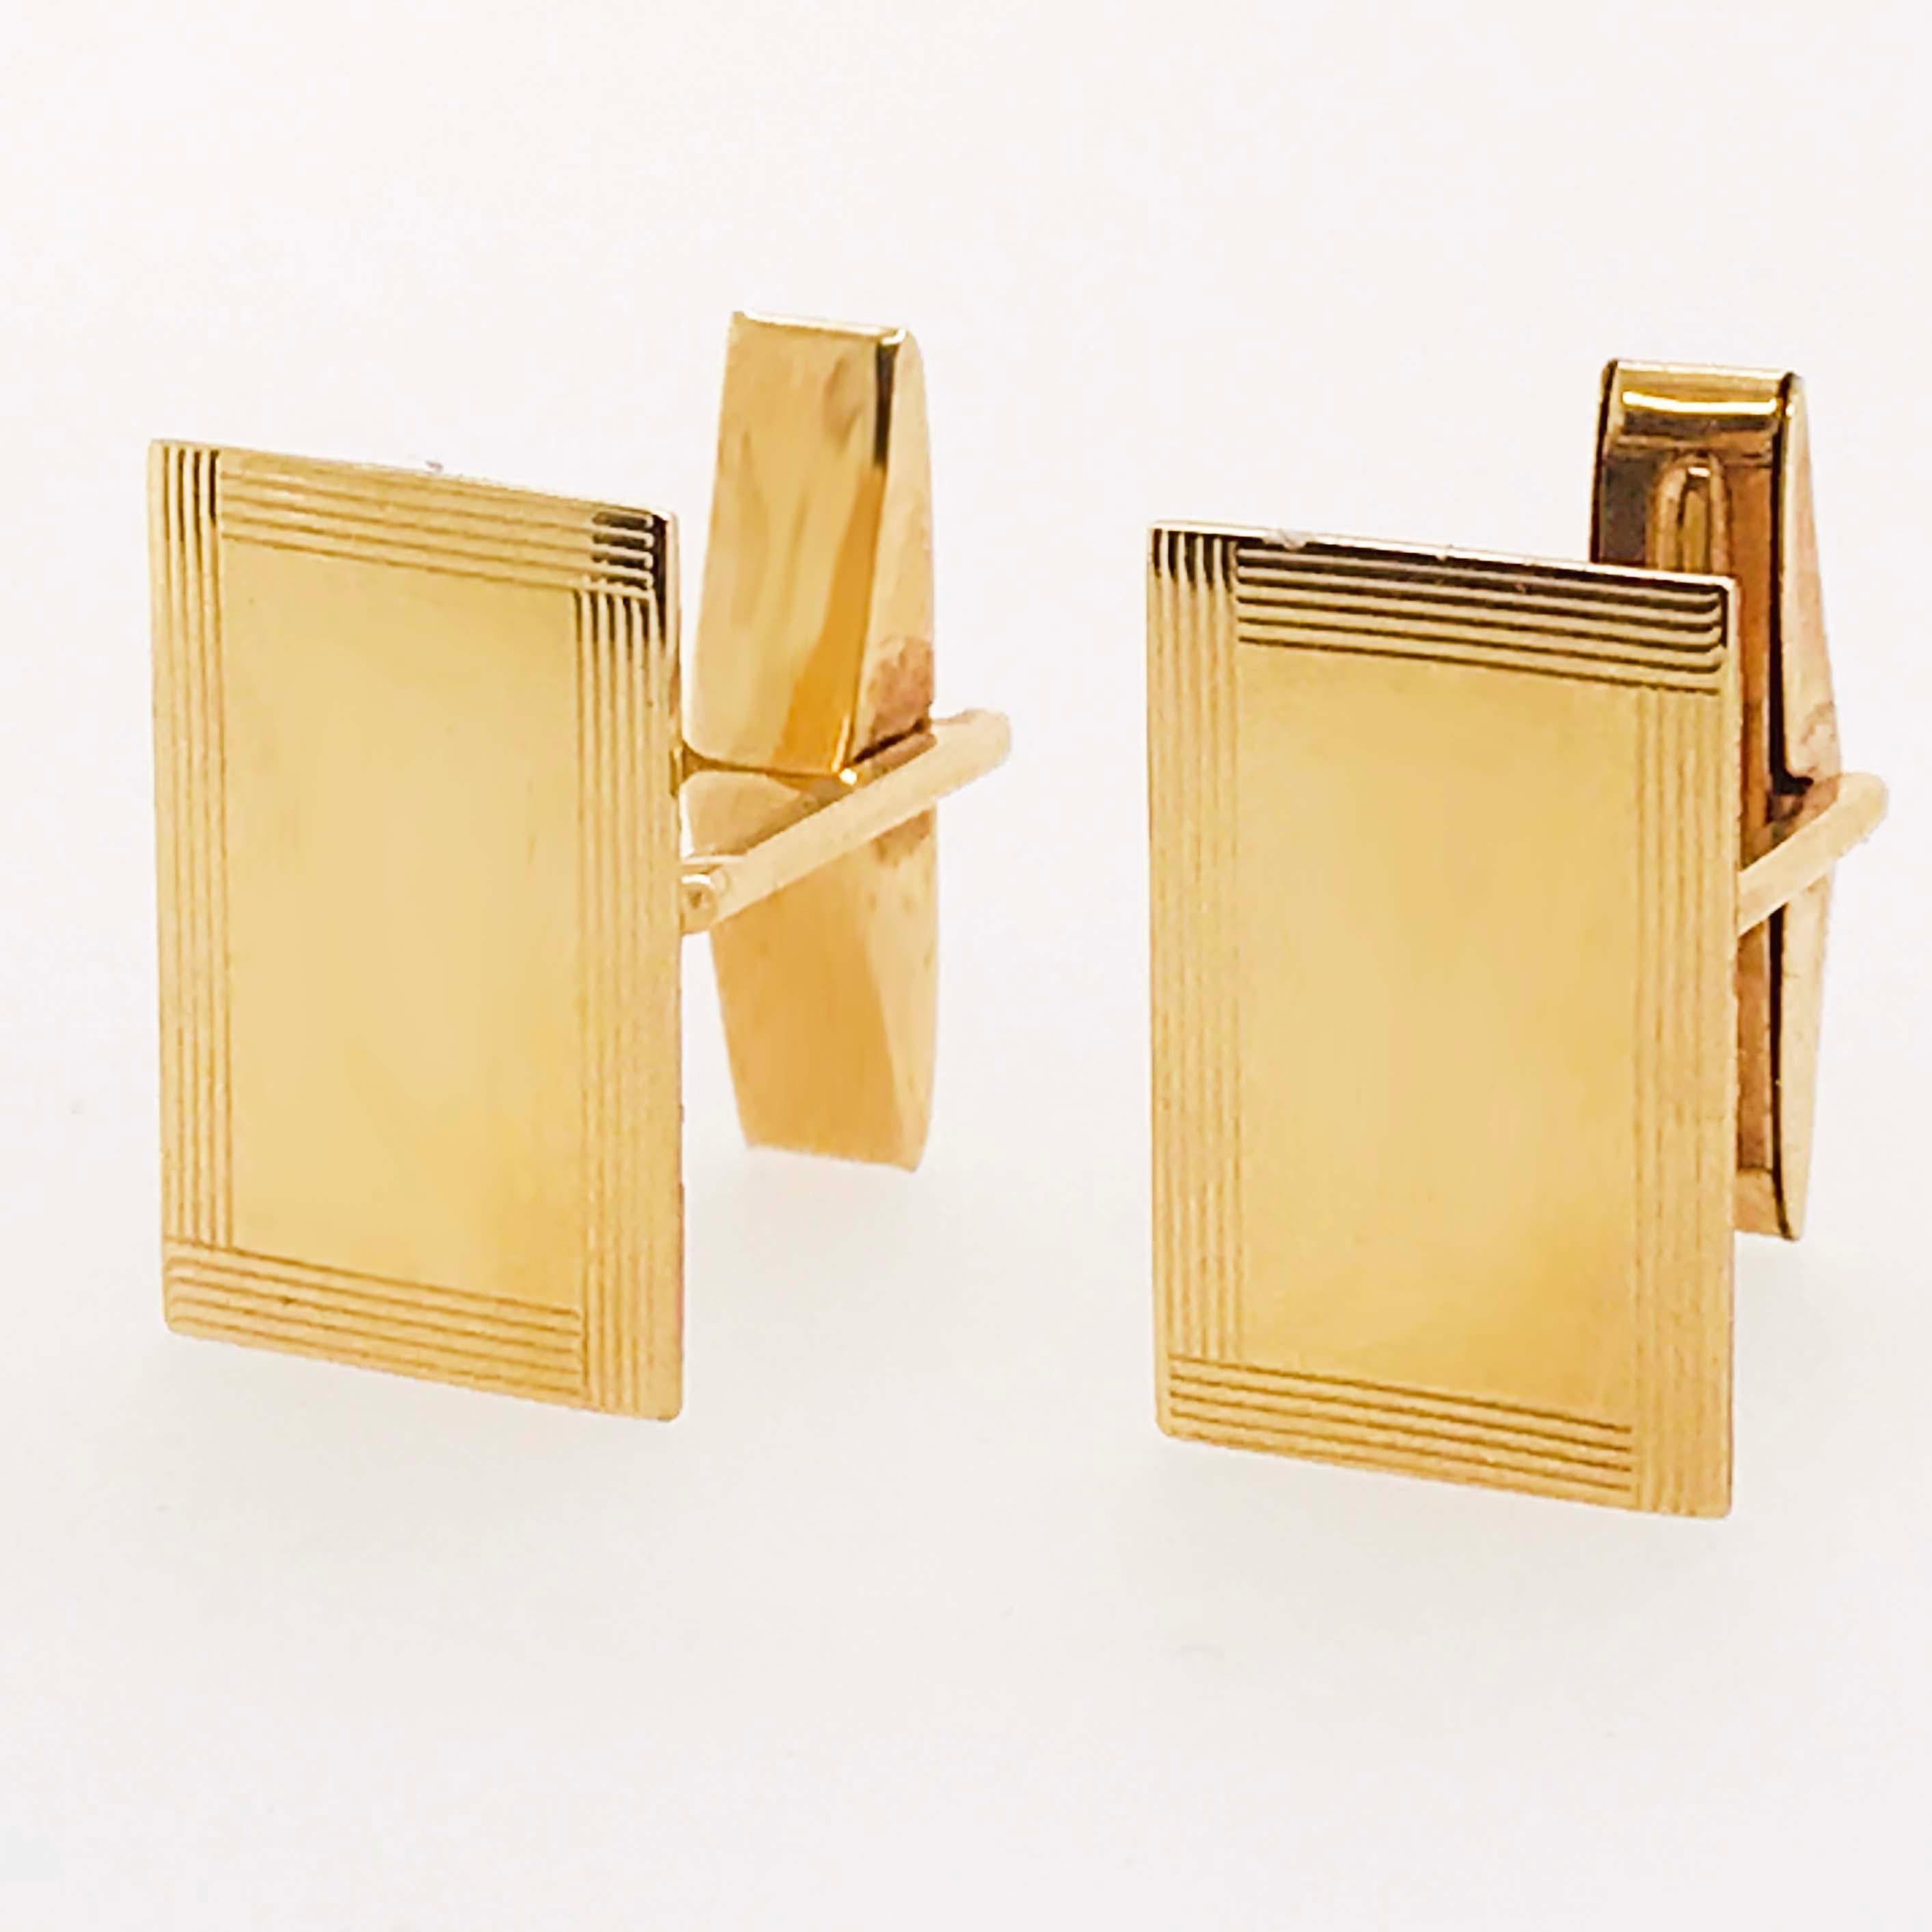 These high polish, gold plate cuff-links are stylish and modern and can be personalized! With a clean, high polish finish on a rectangular gold plate made with 14 karat yellow gold. These men's cuff-links are versatile and go with any formal wear!